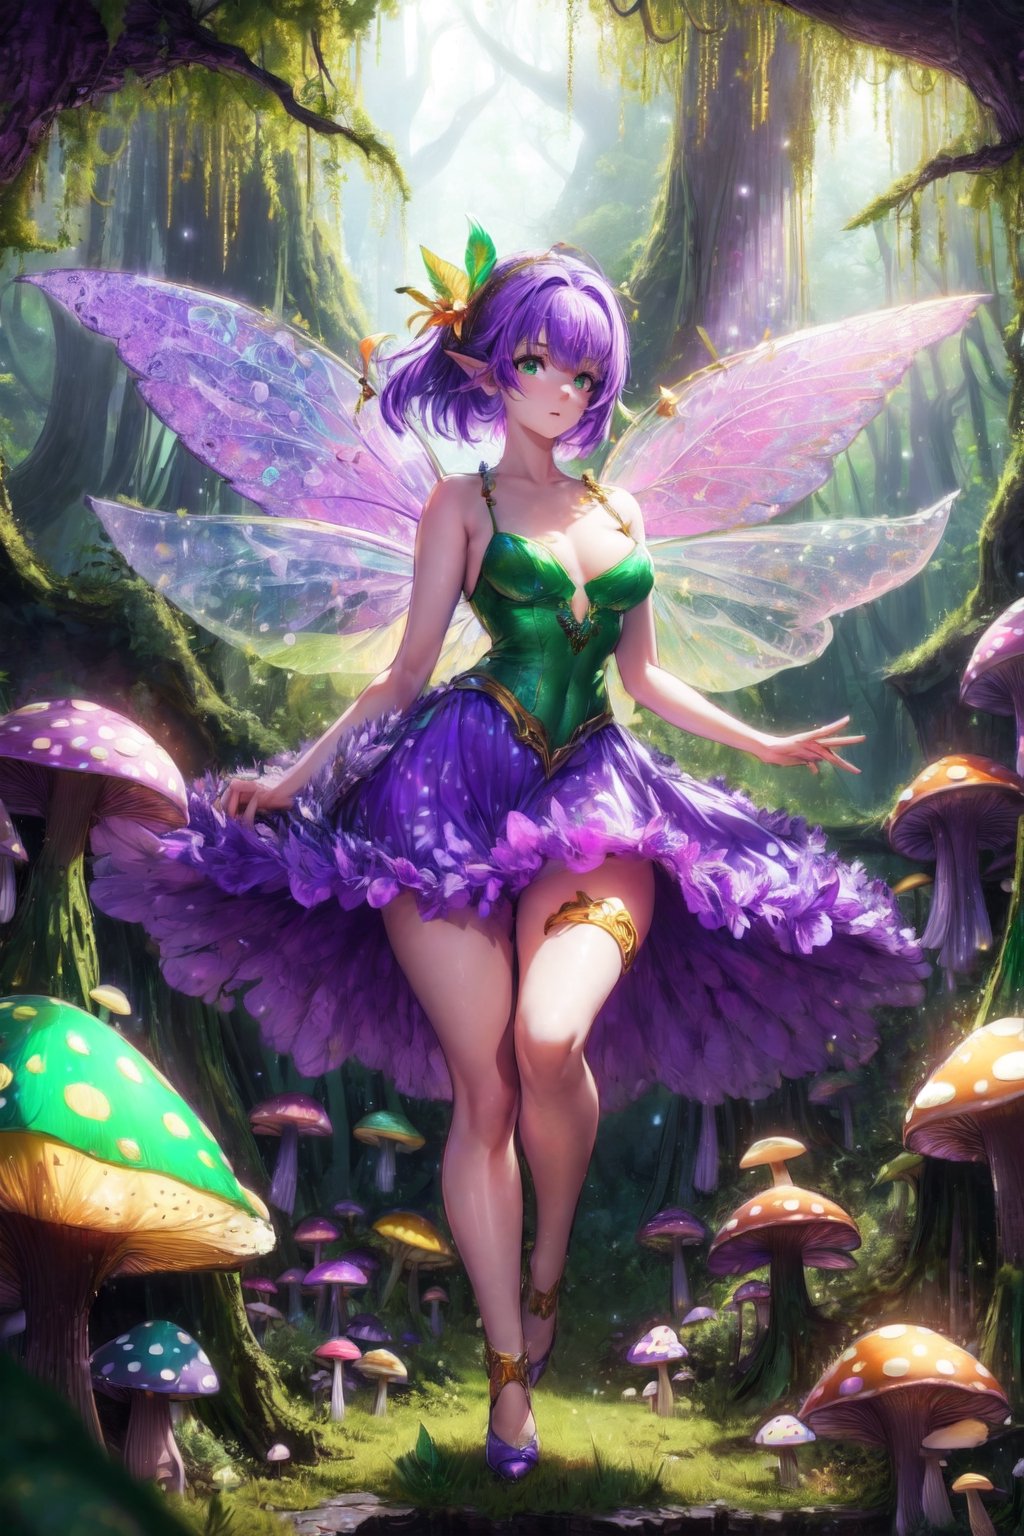 (masterpiece), full body view, flying, best quality, (tiny fairy flying through giant mushroom forest), (translucent purple wings), purple hair, green eyes, full red lips, ((medium breasts), curvy), (cute short dress made of green leaves), (golden hour light), misty forest,DonMF41ryW1ng5XL,more detail XL,DonMG414 ,DonMF41ryW1ng5